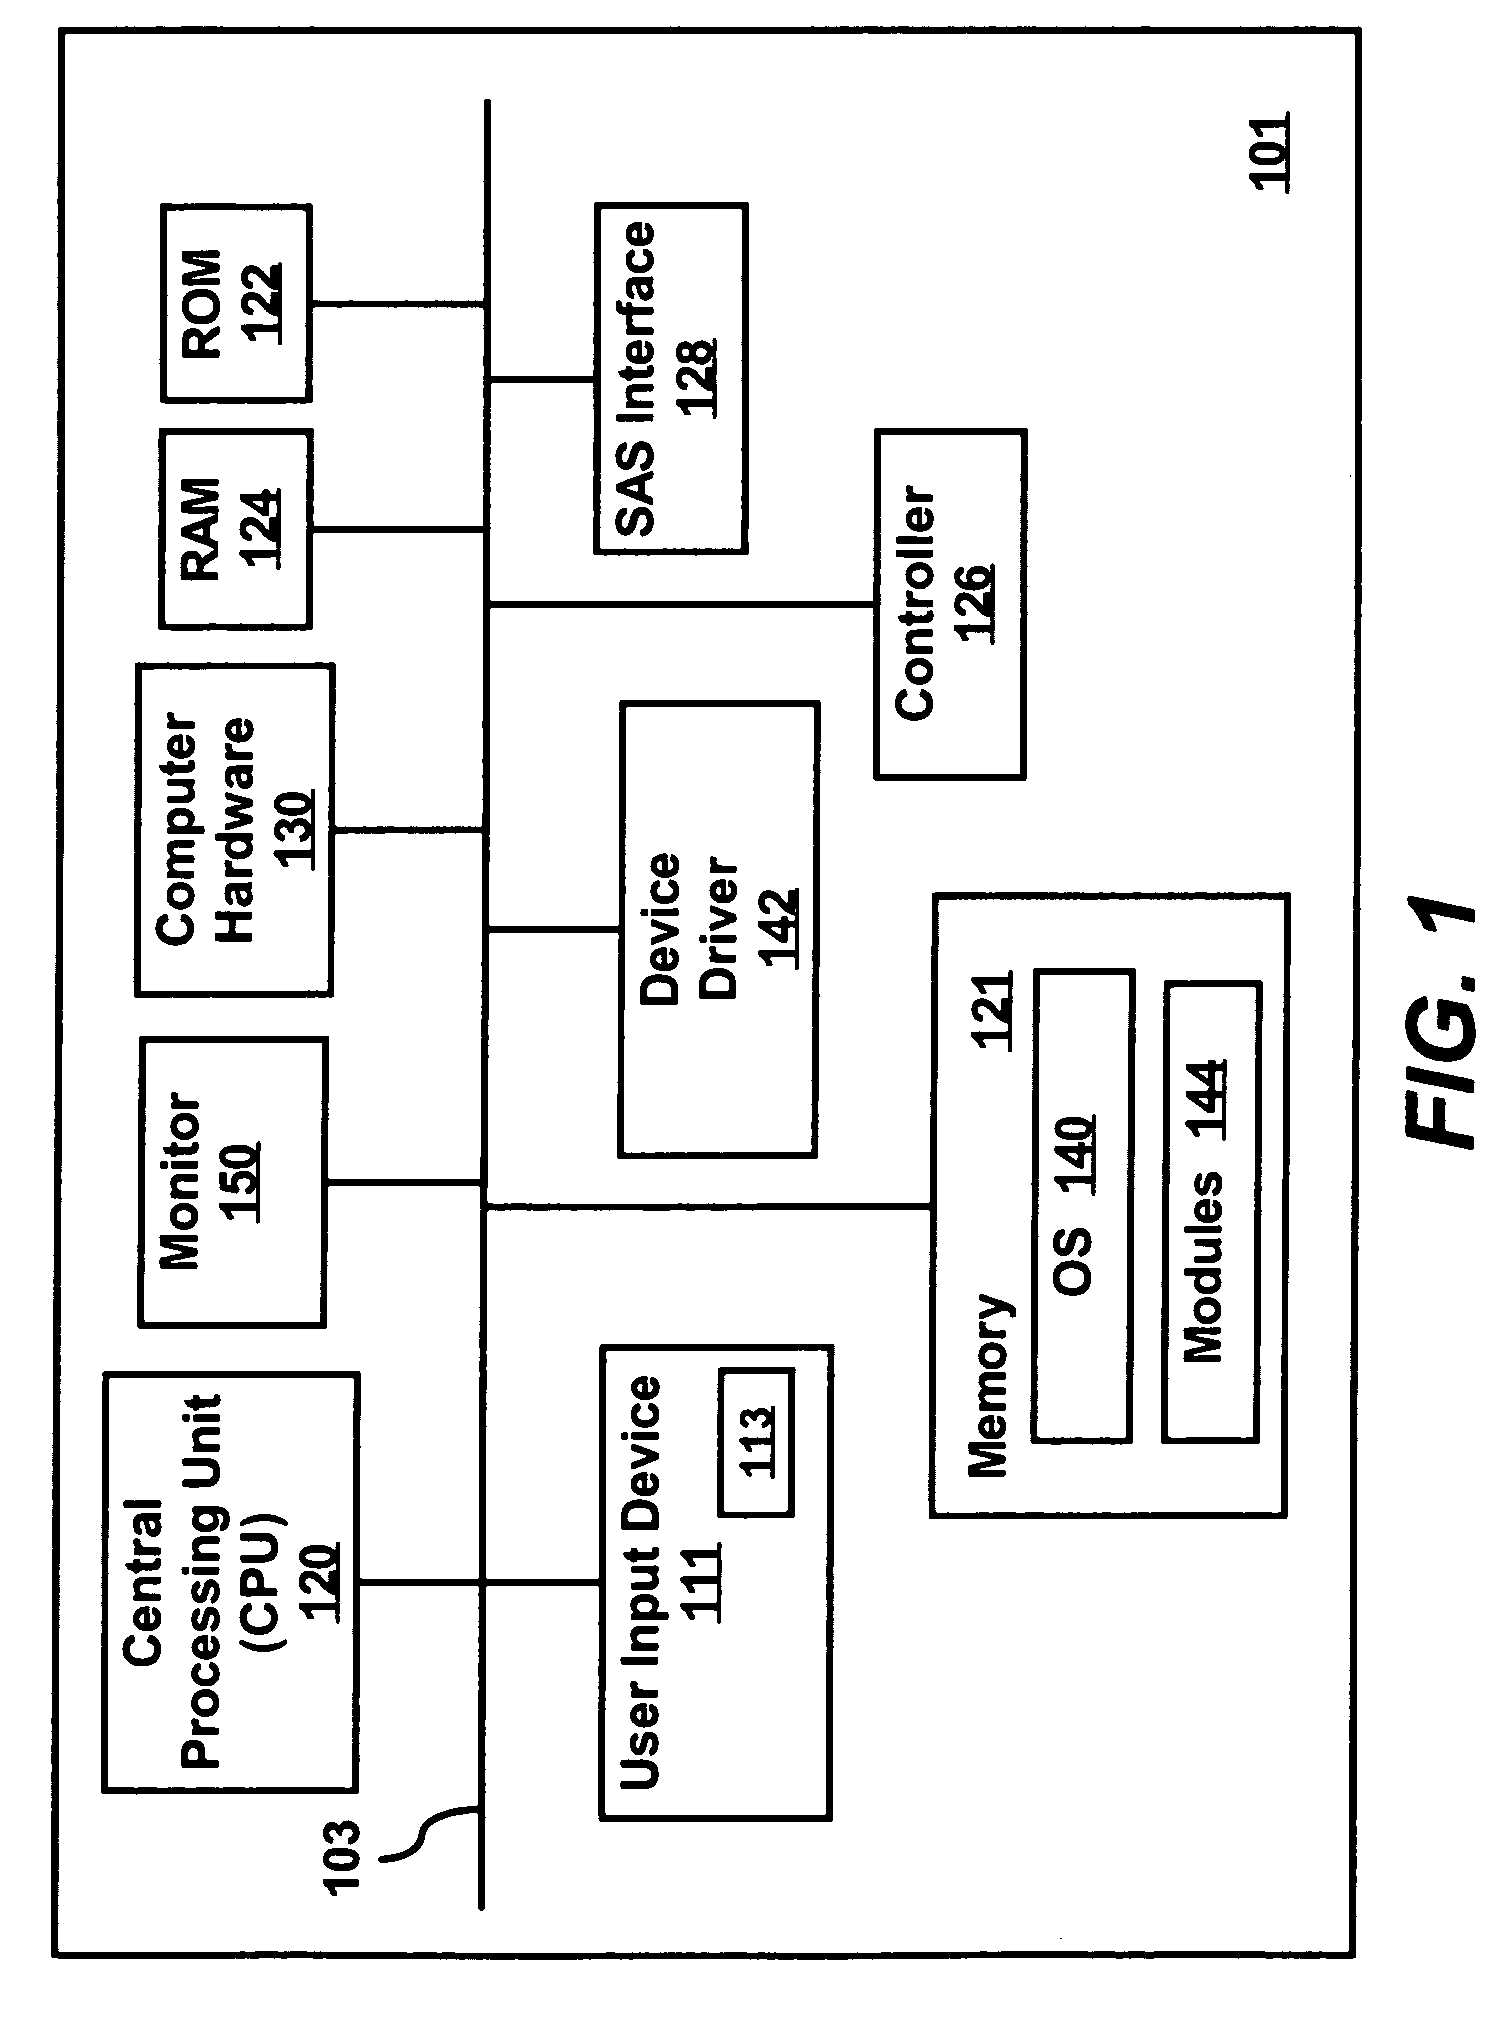 User configurable device simulator with injection error capability